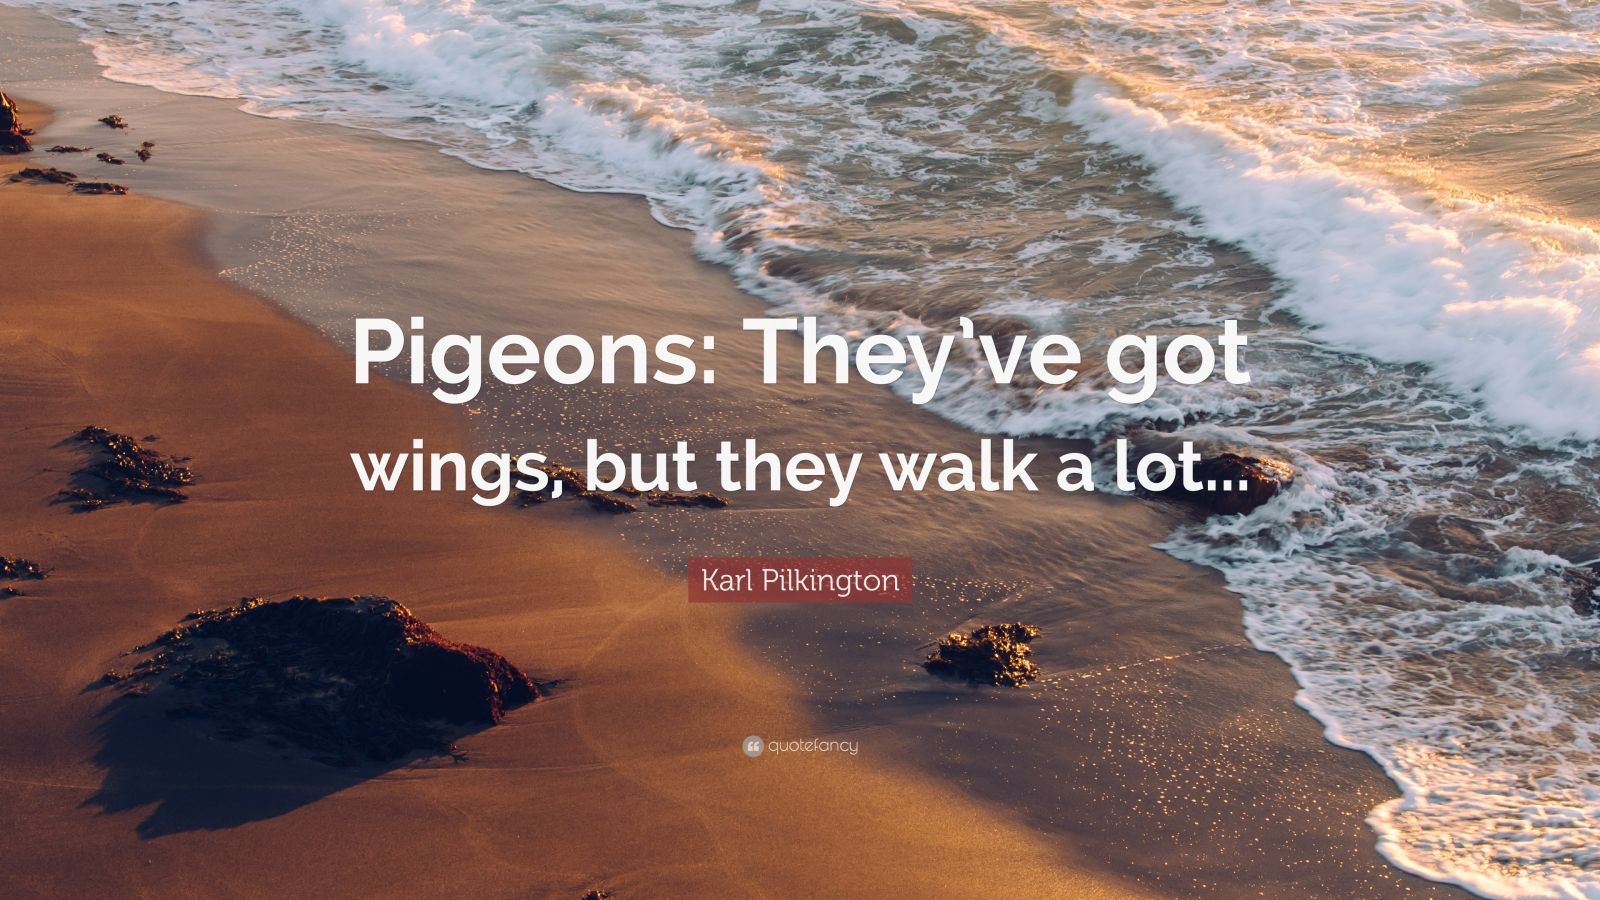 Karl Pilkington Quote: “Pigeons: They’ve got wings, but they walk a lot